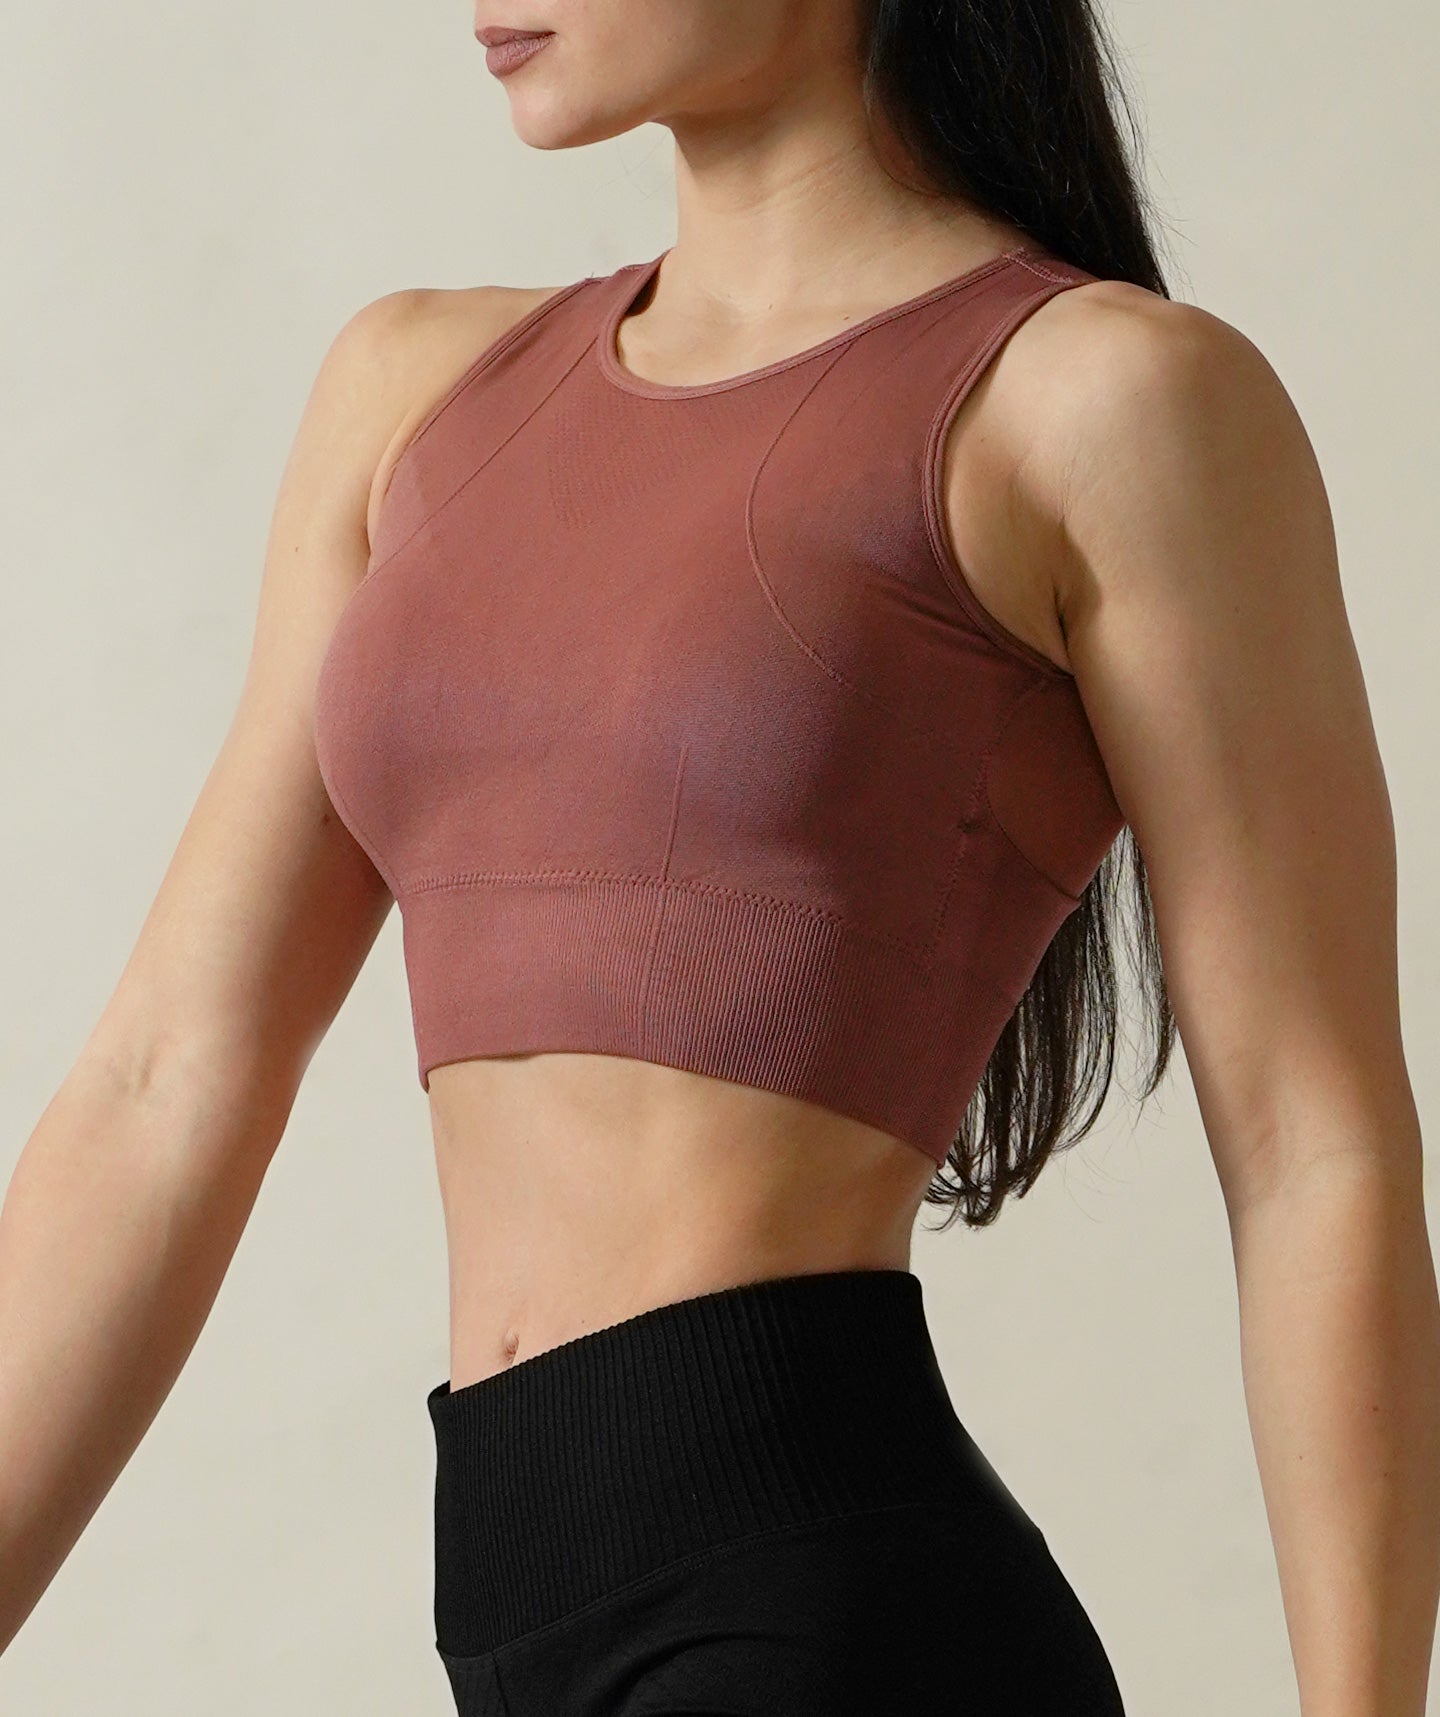 Equinox Crop Top with Transparent Mesh in Indian Red